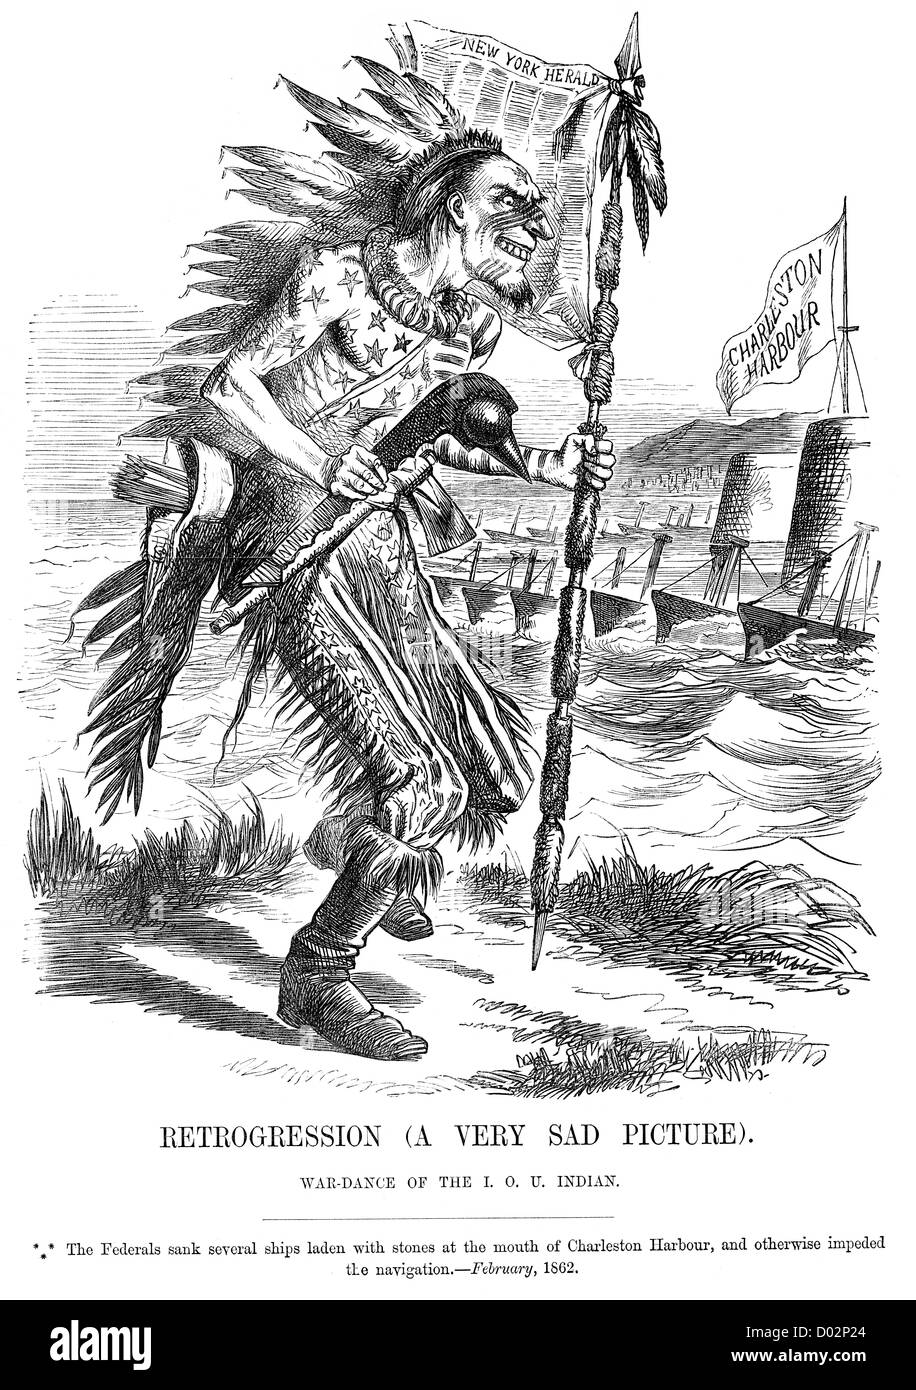 Retrogression war dance of the IOU Indian. Political cartoon about blockade of Charleston Harbour, during the American Civil War Stock Photo